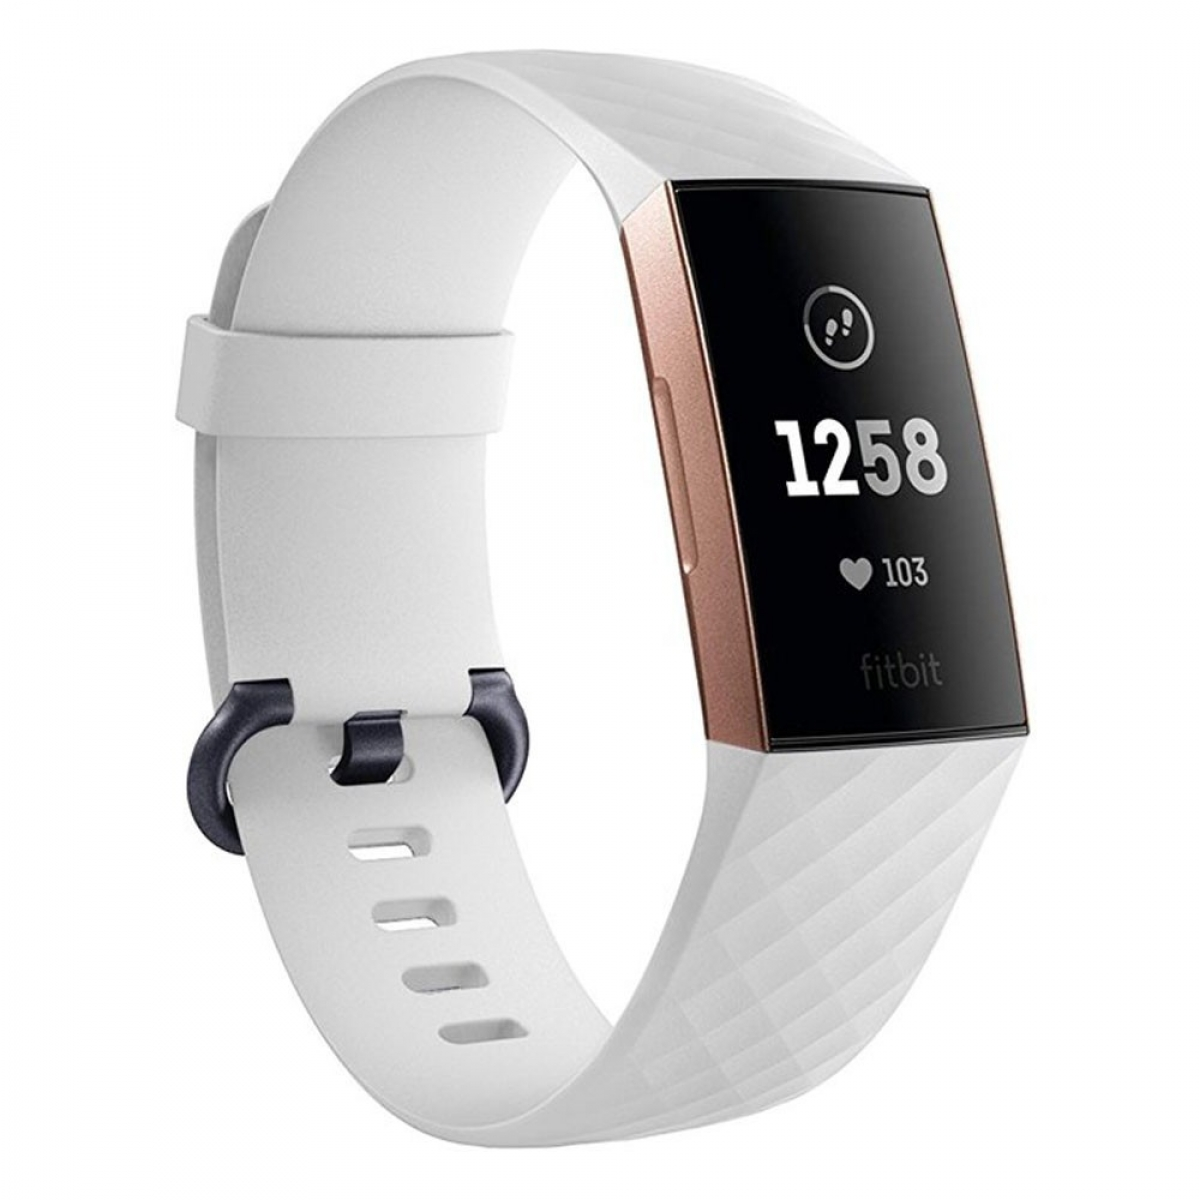 Charge Silikon, Smartband, Fitbit Multicolor 3, CASEONLINE Fitbit,